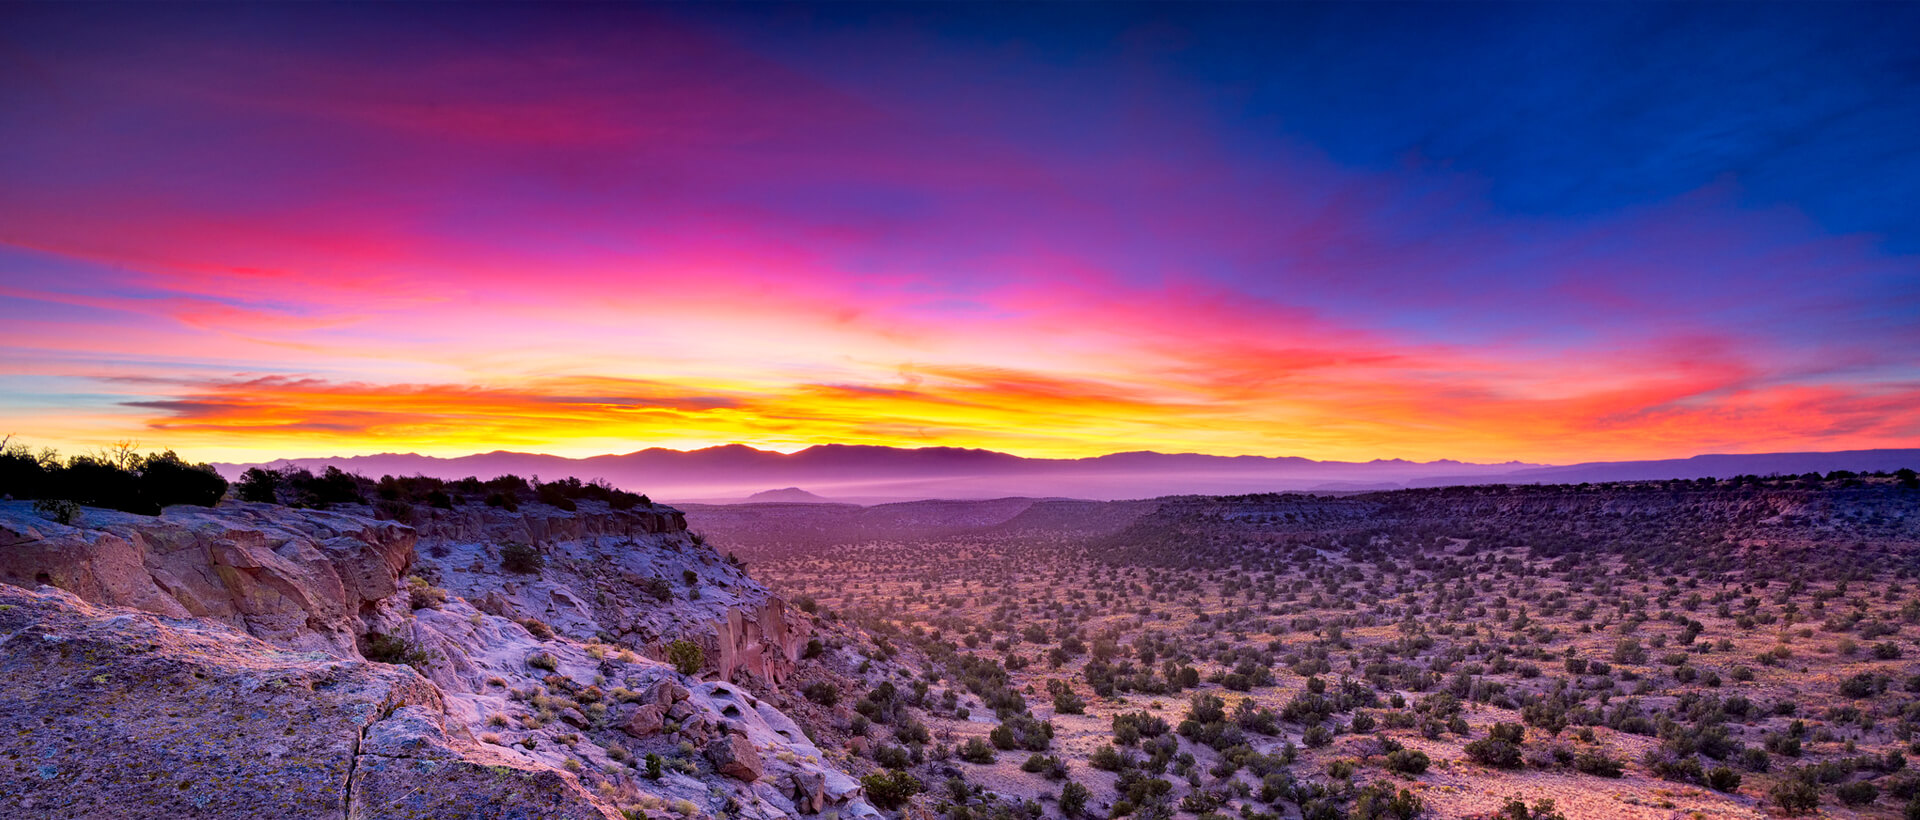 New Mexico Landscape at sunset